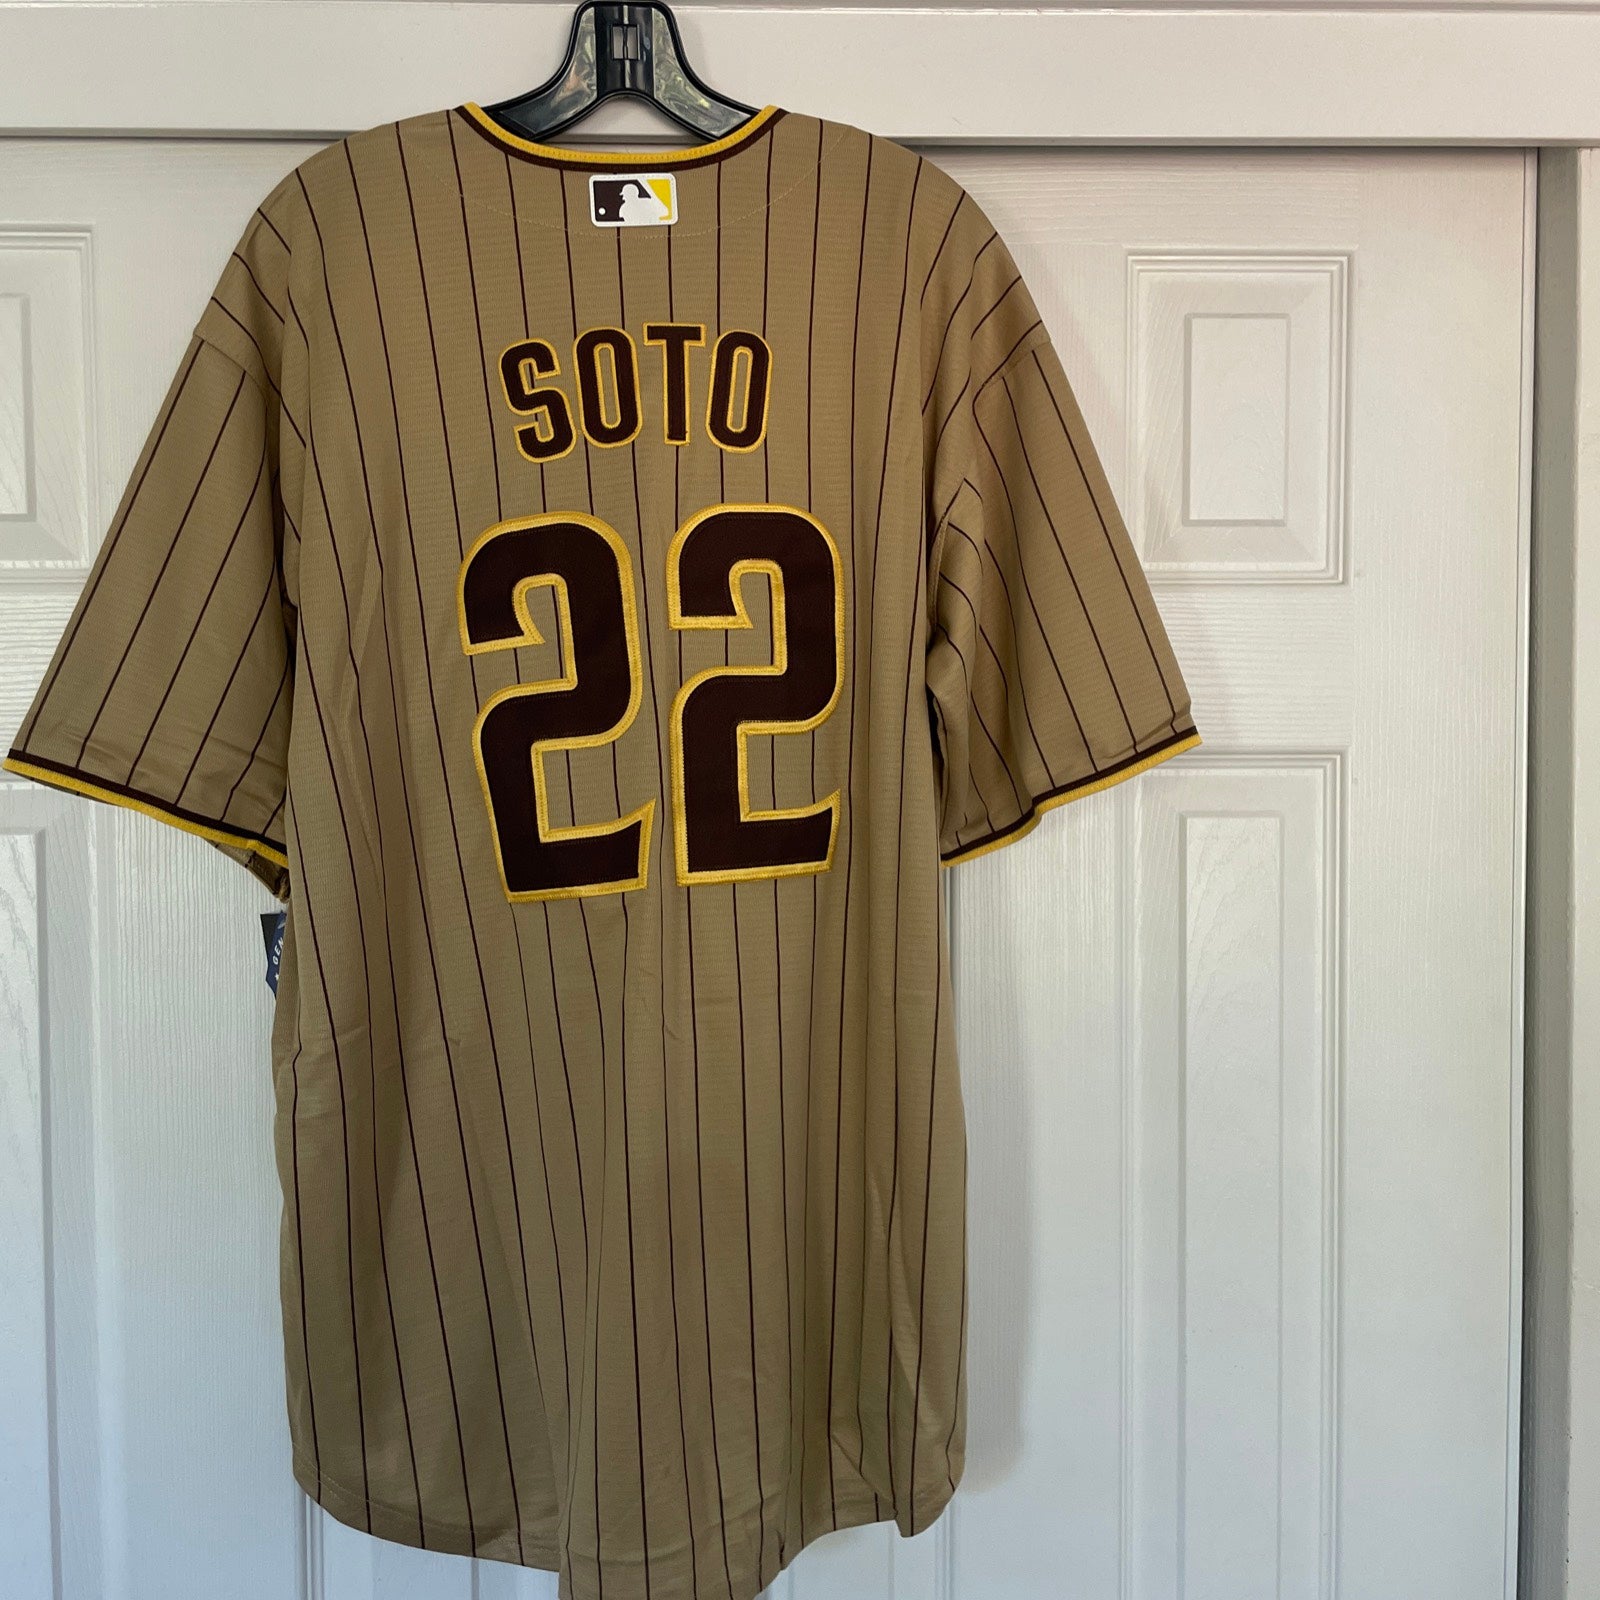 soto jersey padres